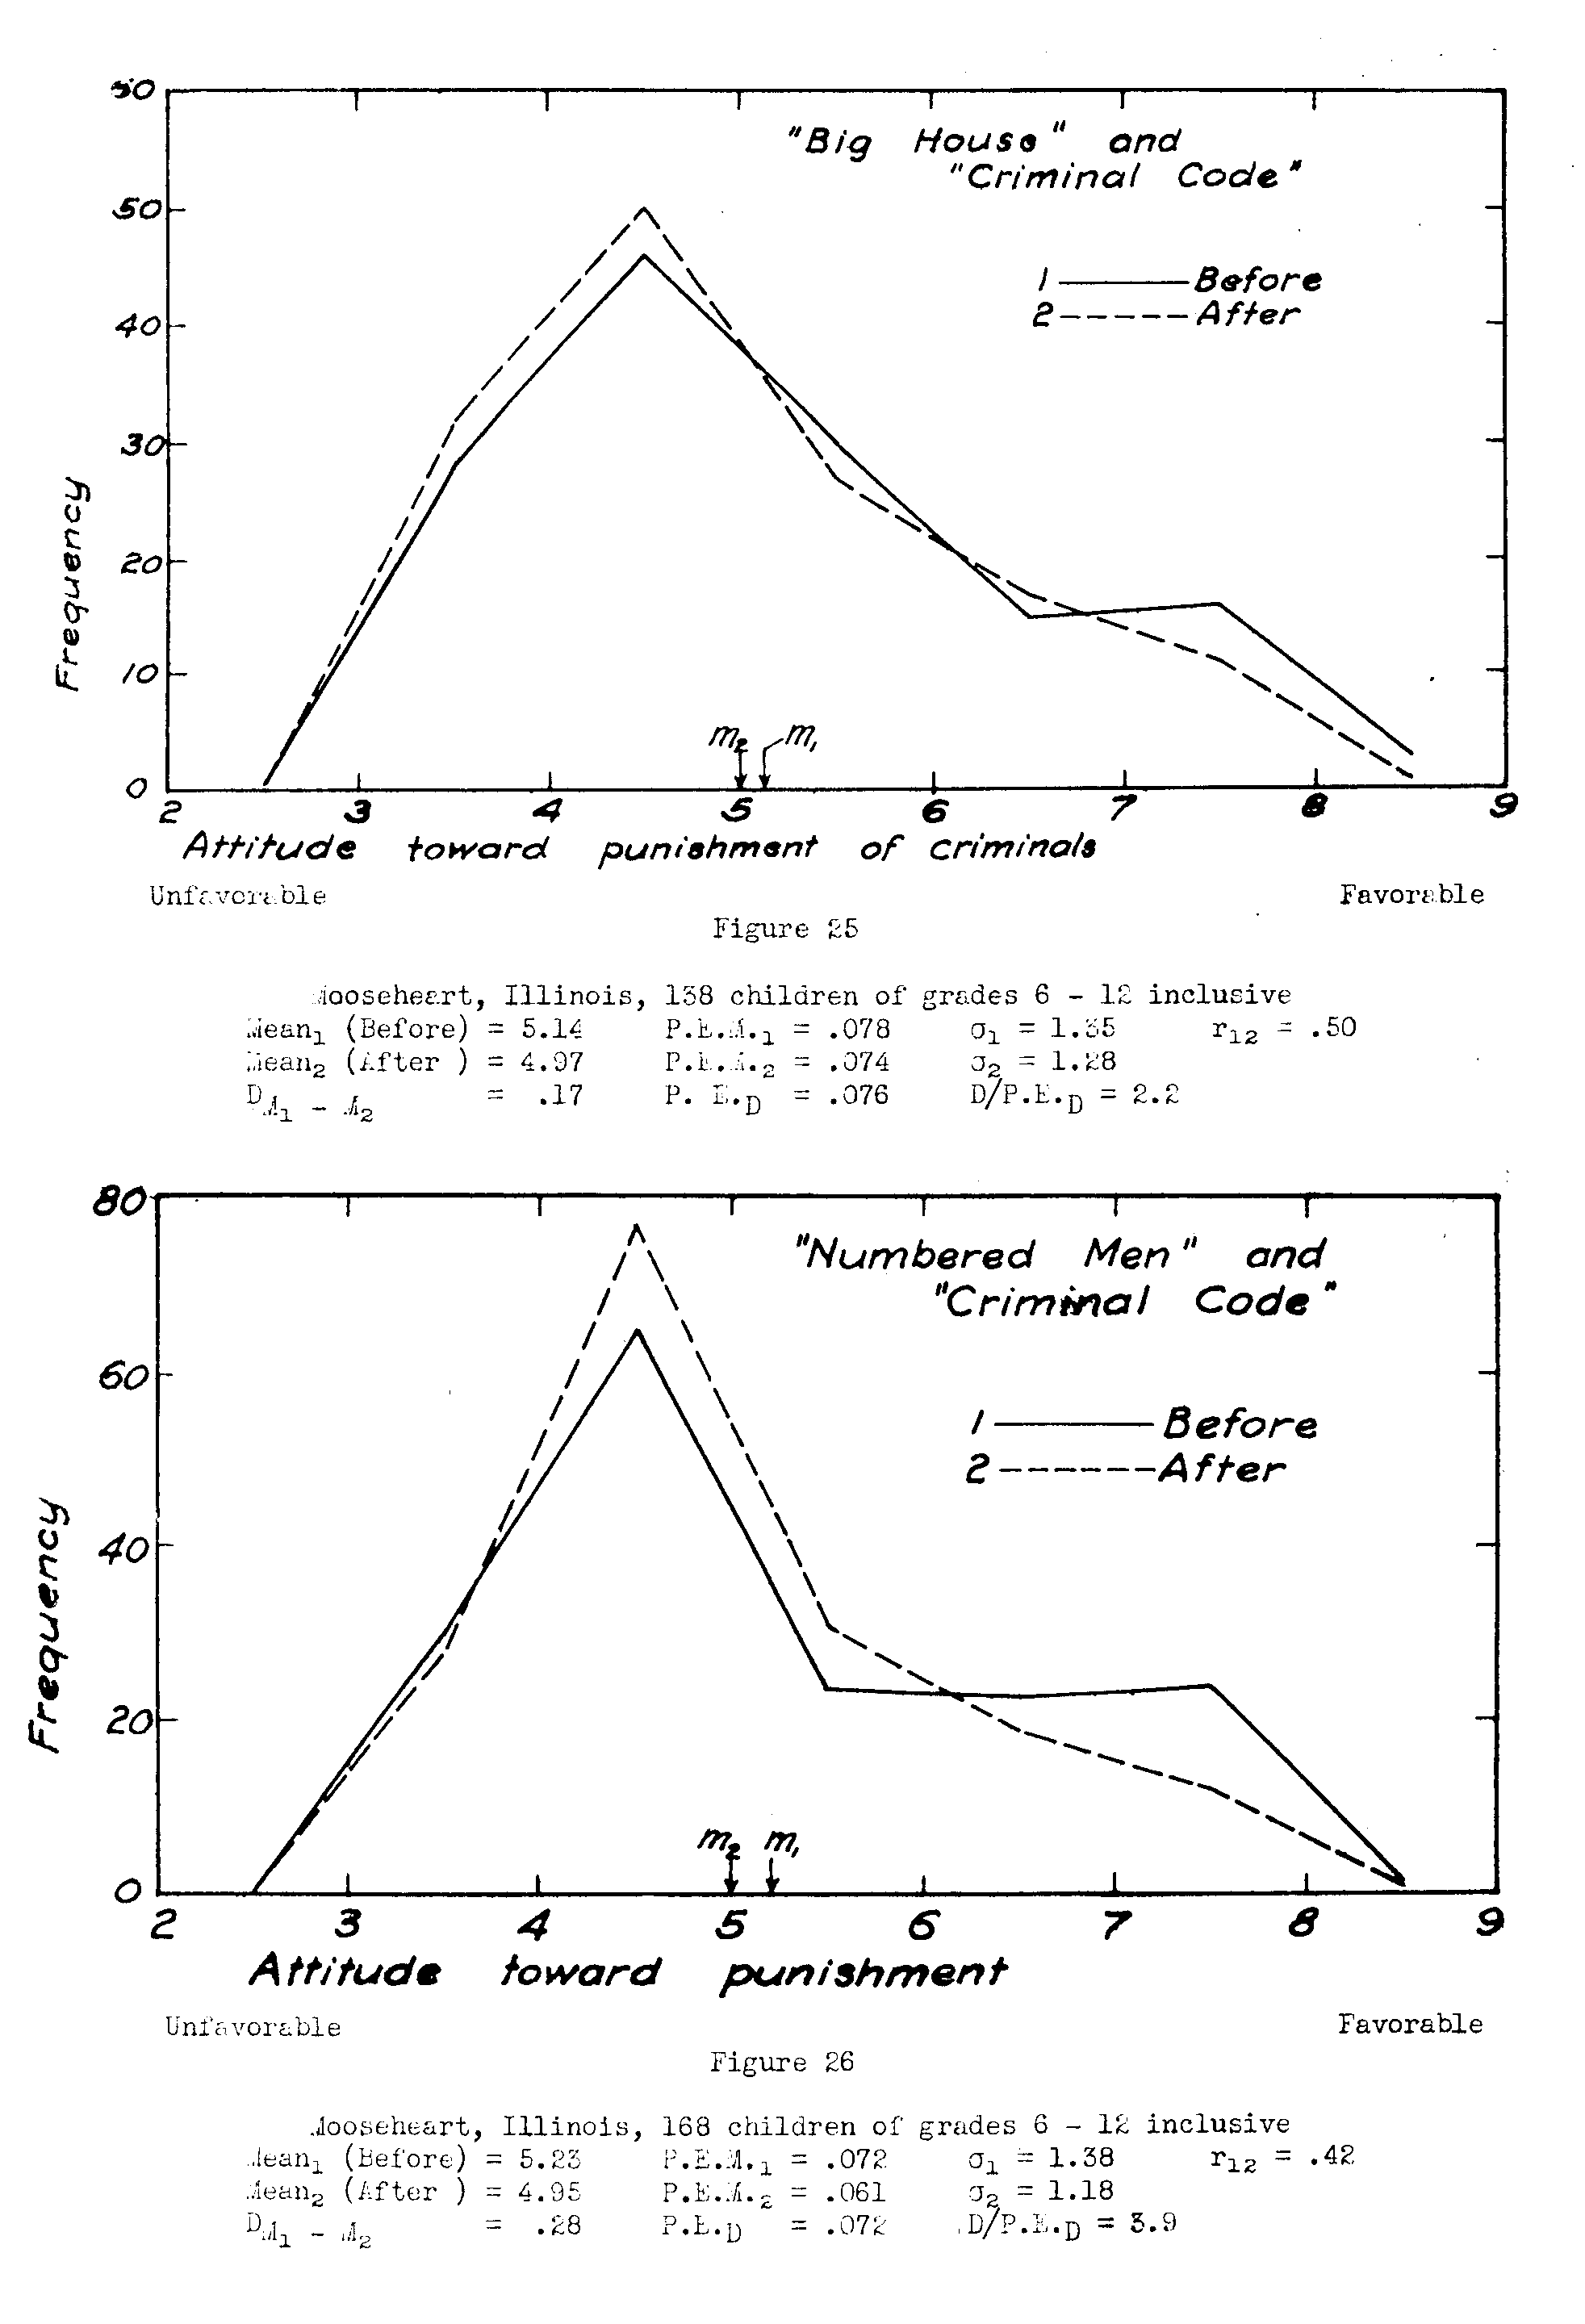 Figure 26, Attitude toward punishment, before and after BIG HOUSE and CRIMINAL CODE